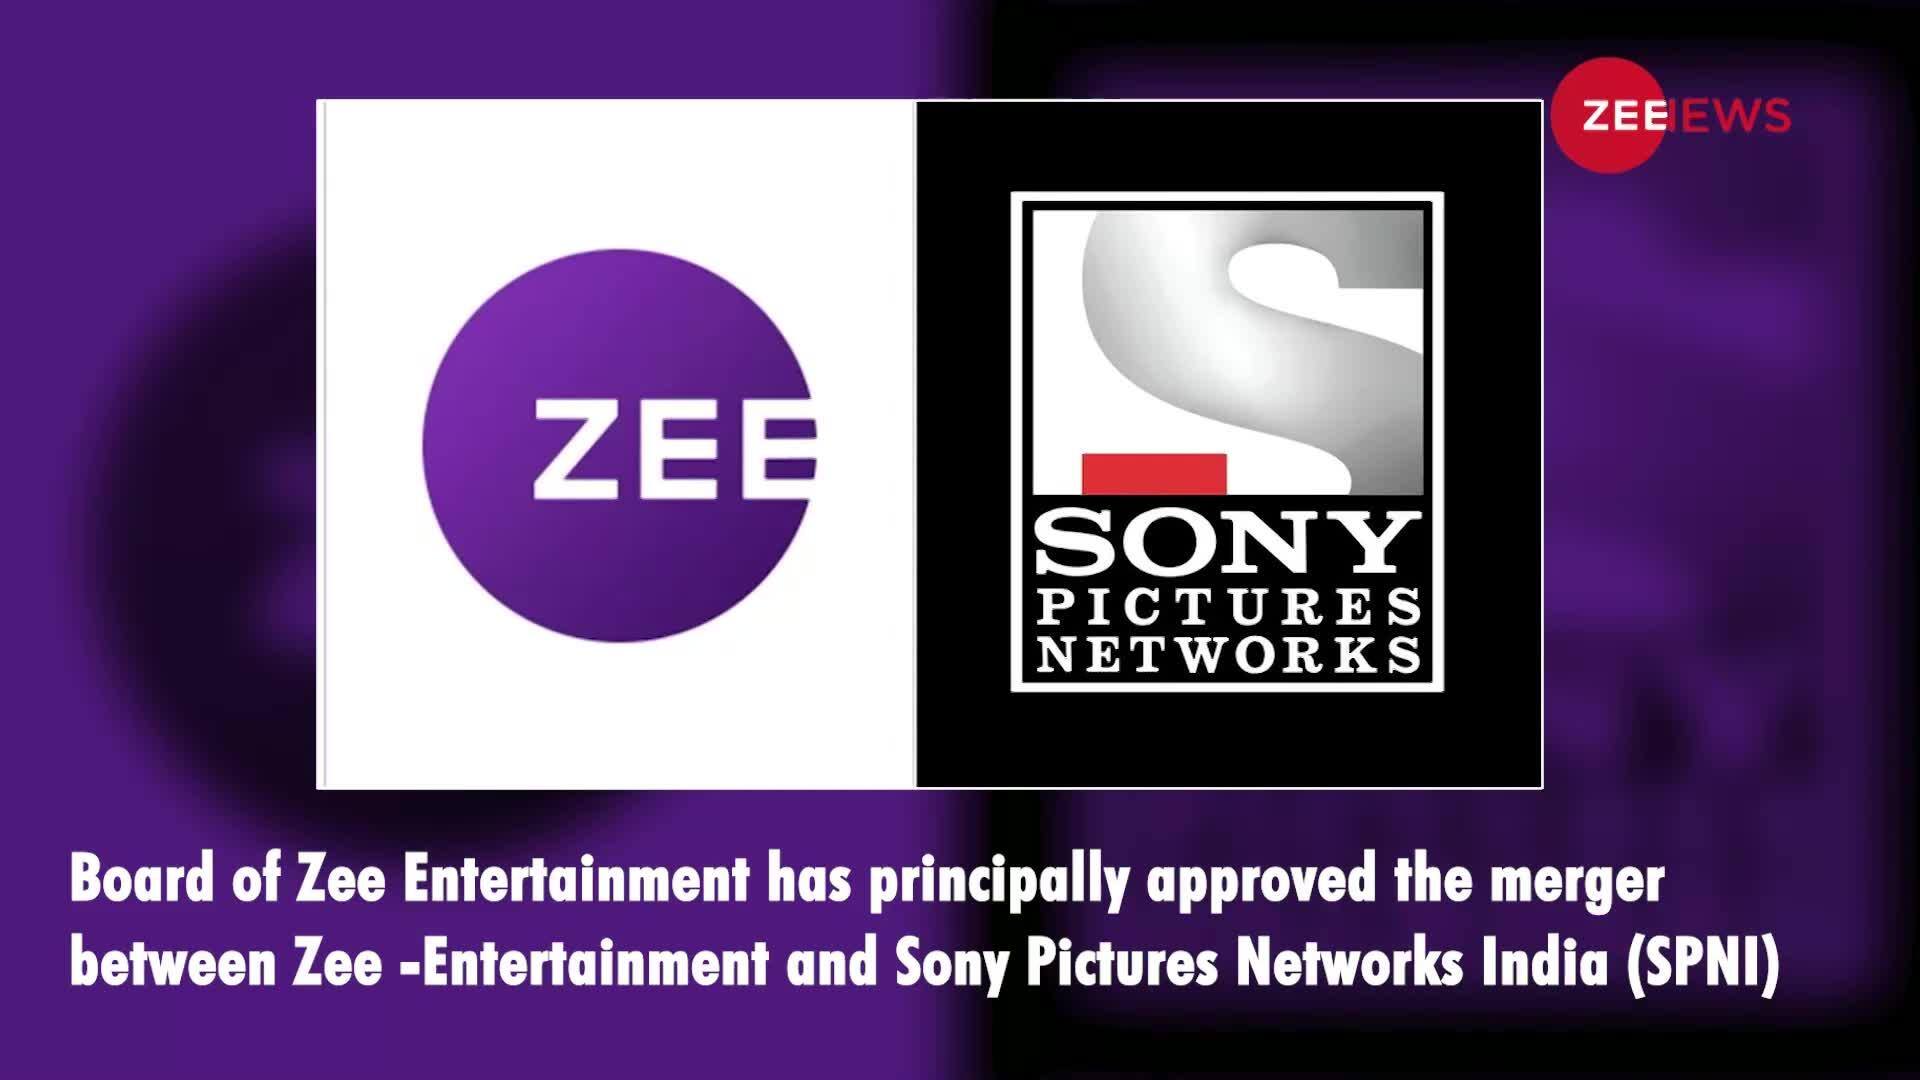 Everything You Need To Know About Zeel Sony Mega Merger Zee News 9281